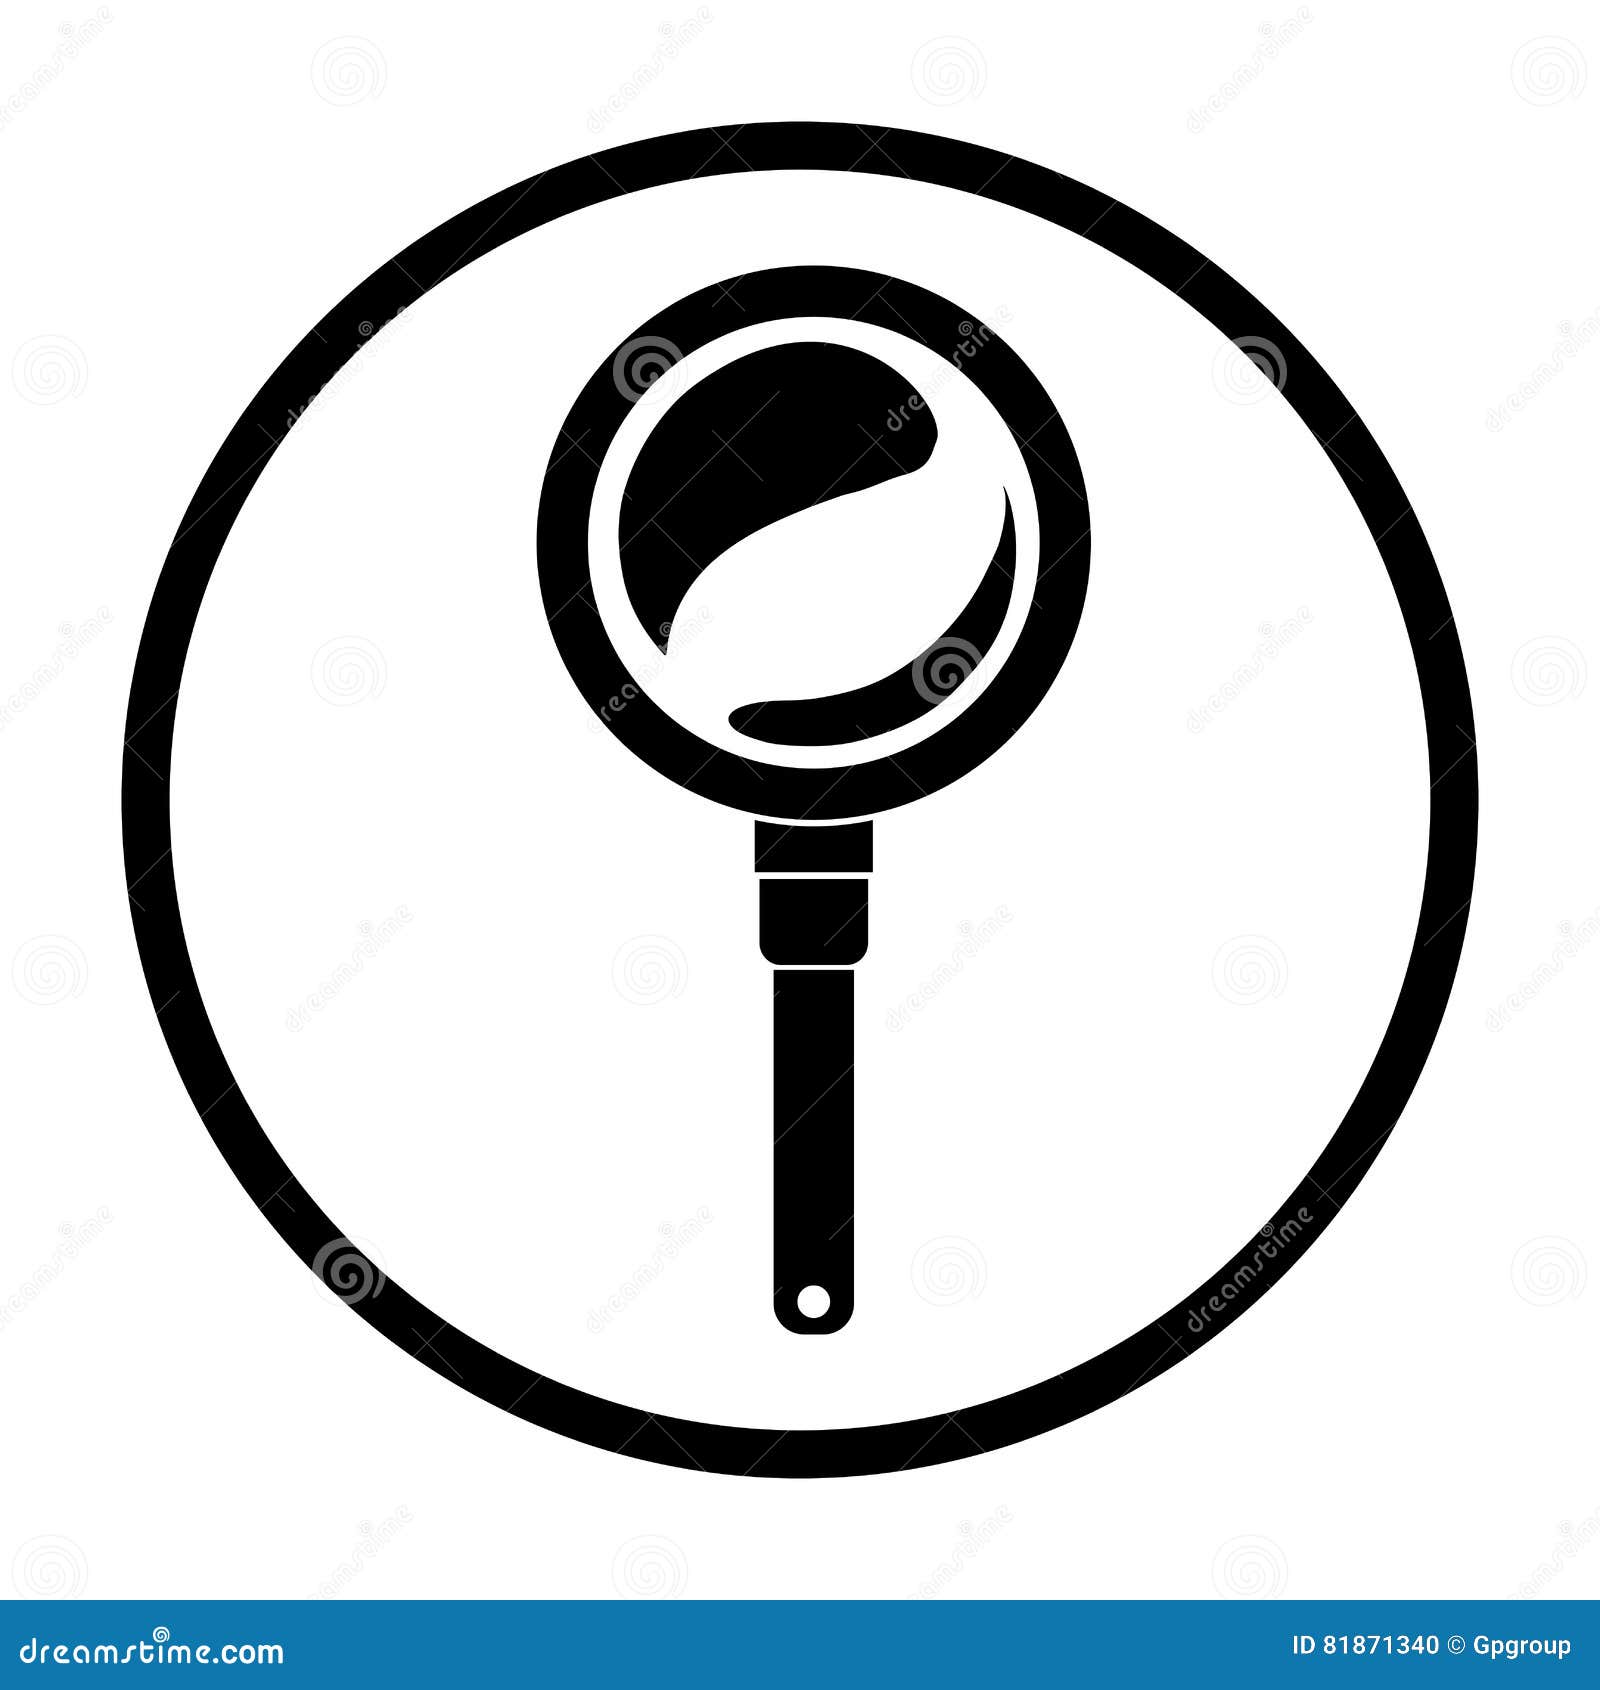 Isolated lupe tool design stock vector. Illustration of magnification ...